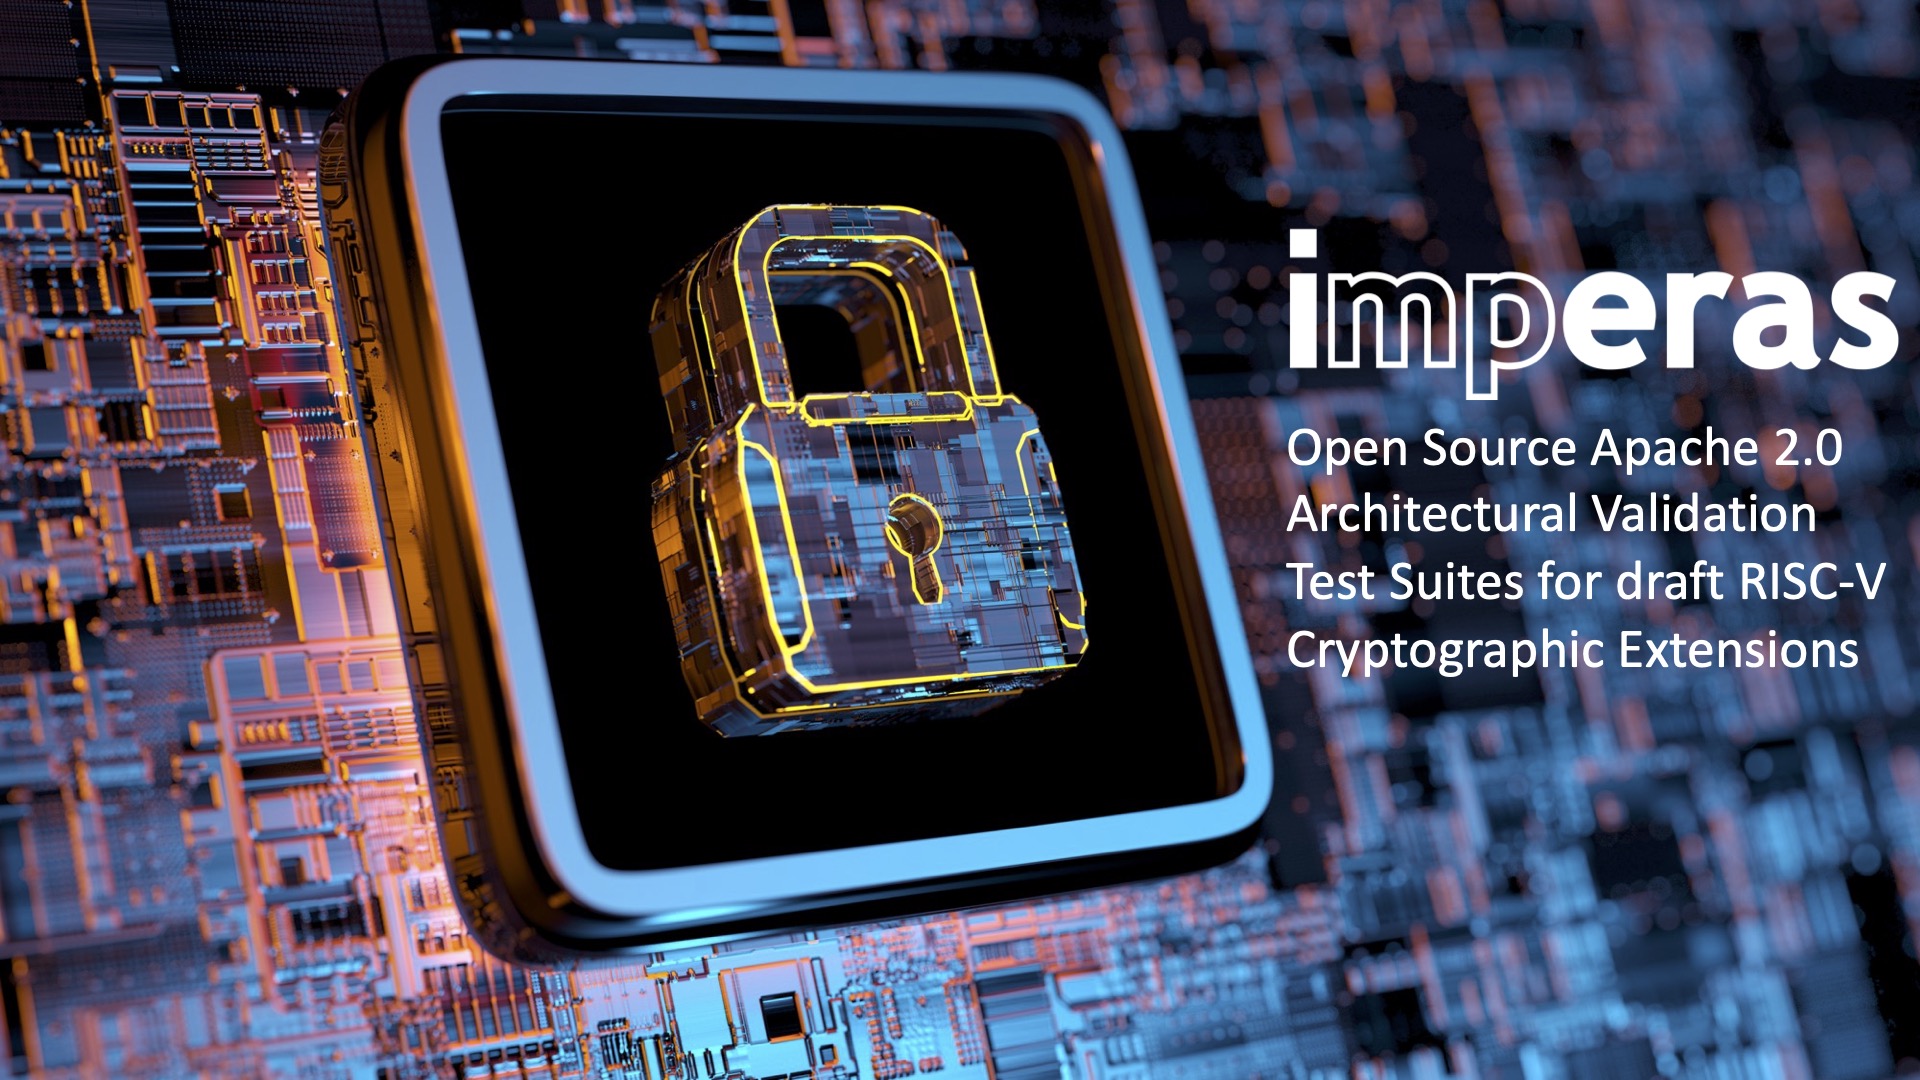 Imperas Open Source Apache 2.0 Architectural Validation Test Suites for draft RISC-V Cryptographic Extensions